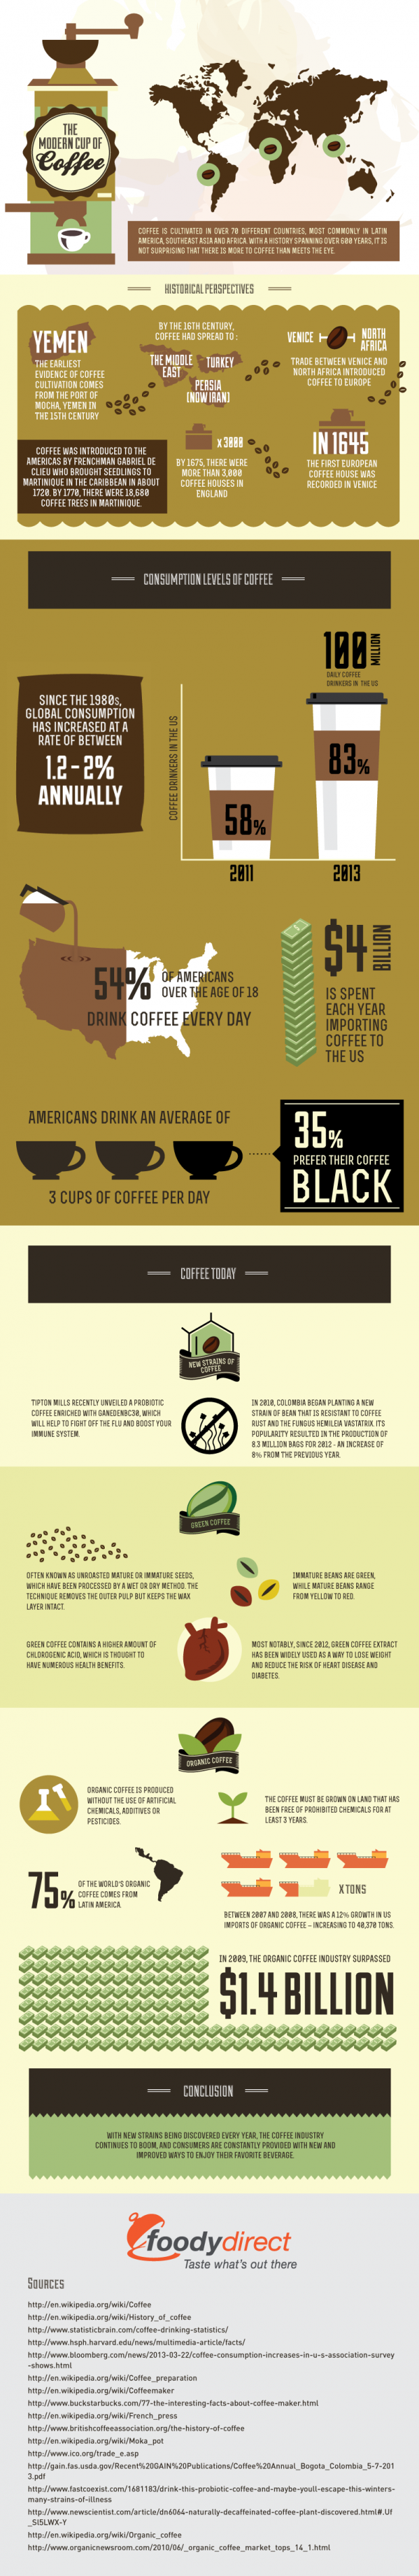 the-modern-cup-of-coffee-infographic5-2